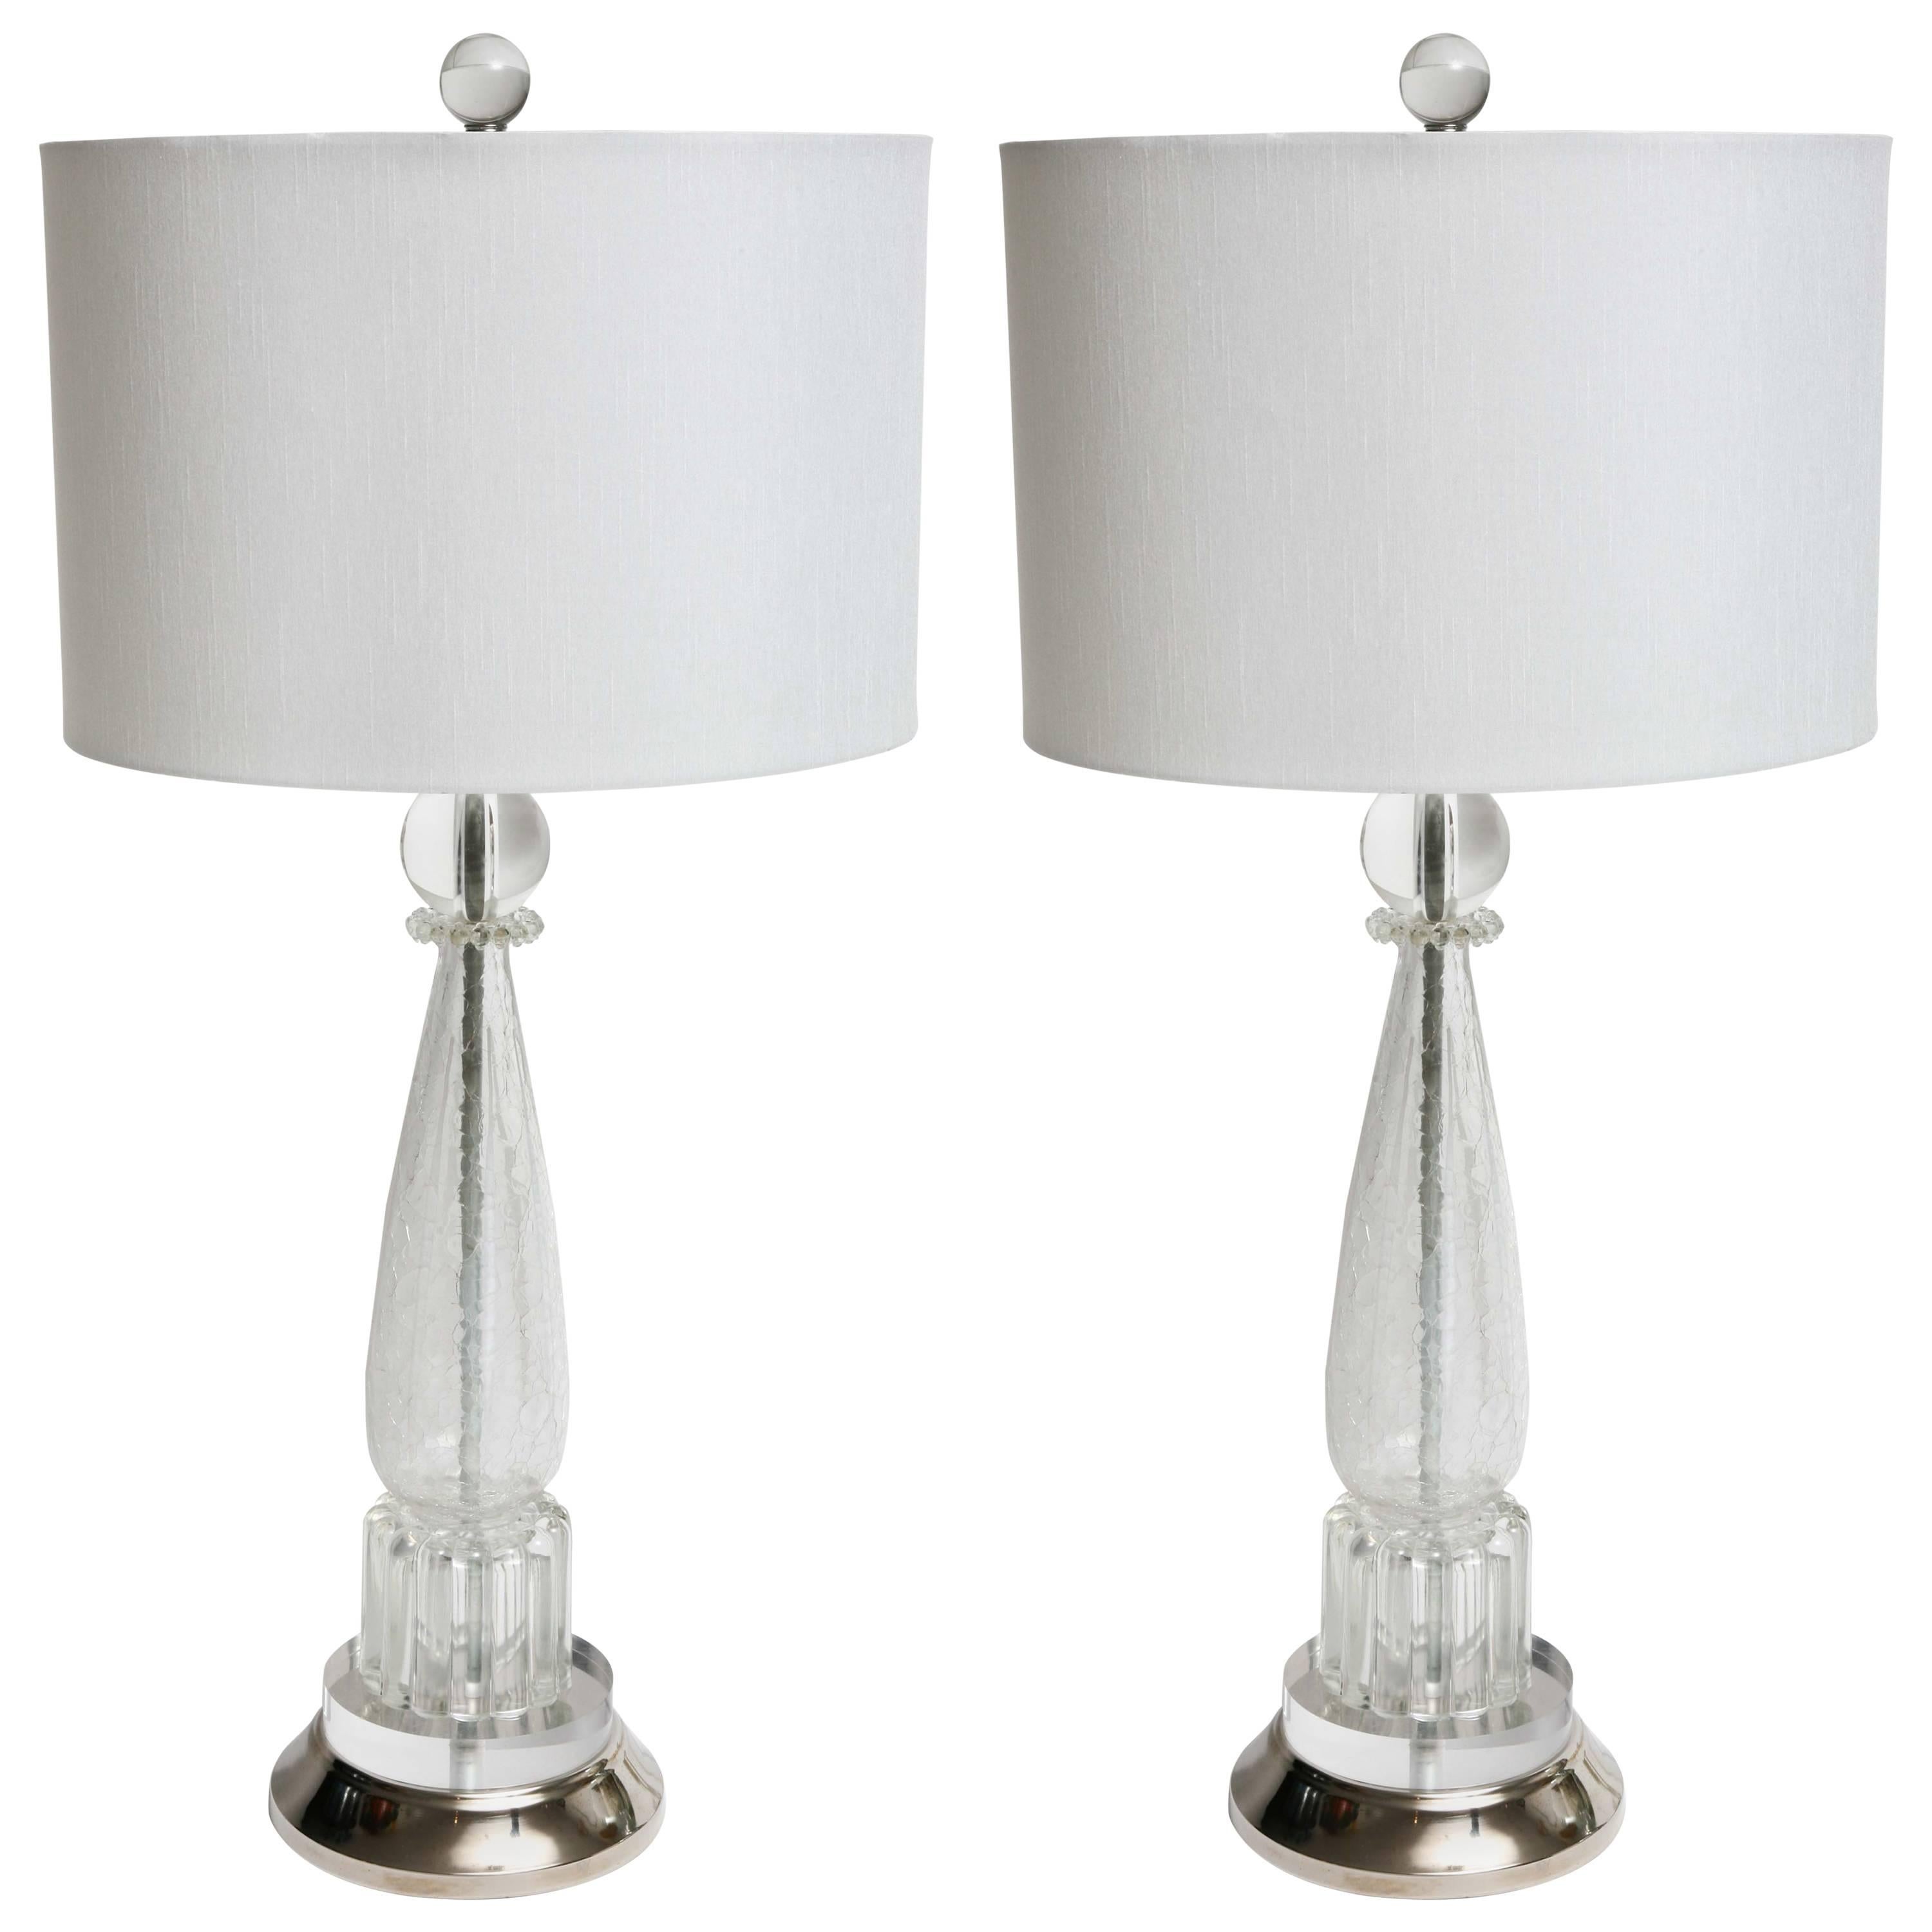 Pair of Mid-Century Modern Hollywood Regency Crystal / Glass Elegant Table Lamps For Sale